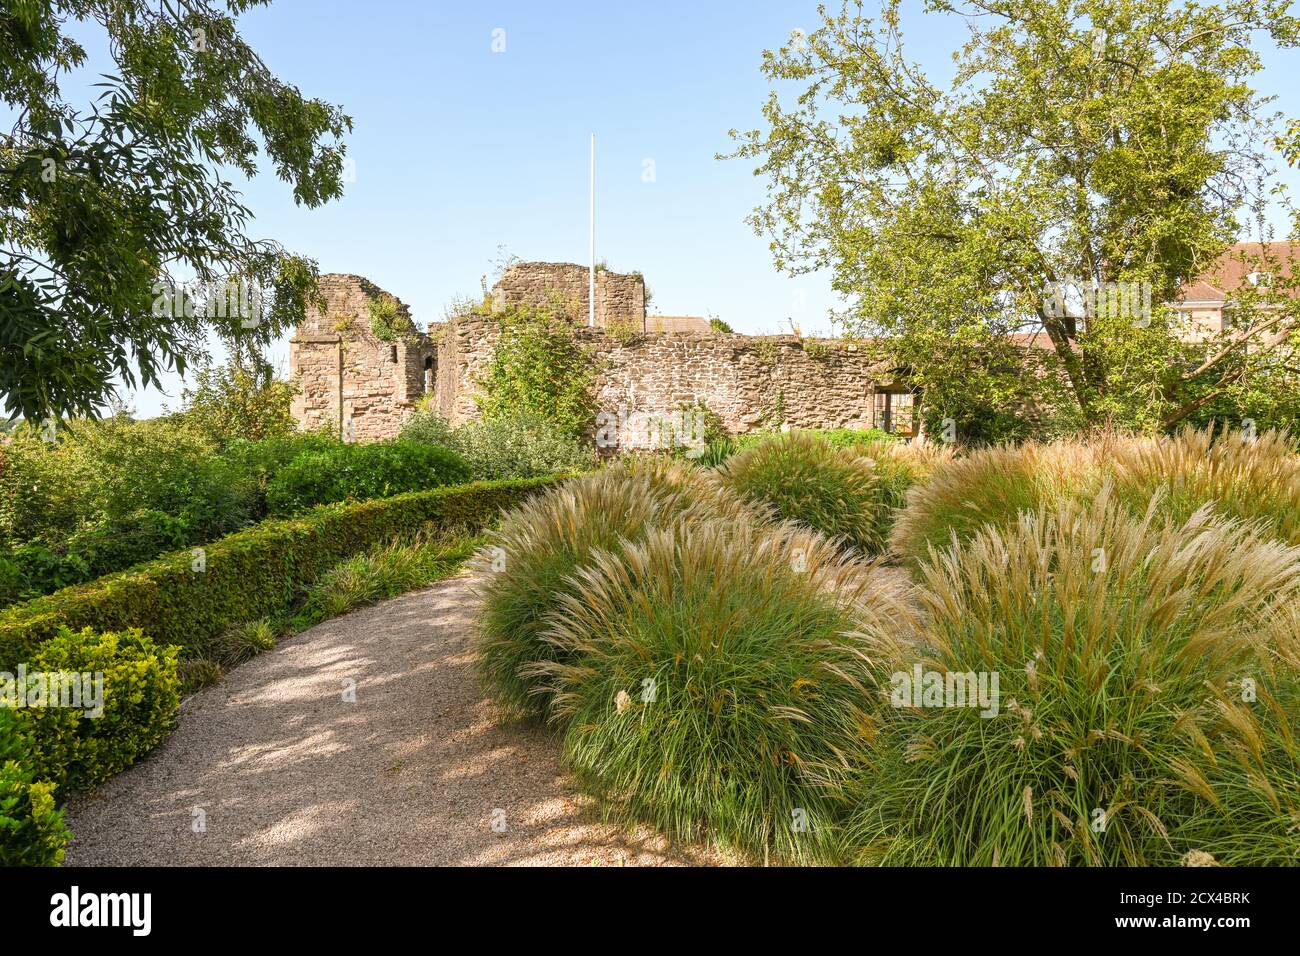 Monmouth, Wales - October 2017: Landscape view of the Garden of Remembrance with the ruined walls of Monmouth Castle in the background Stock Photo